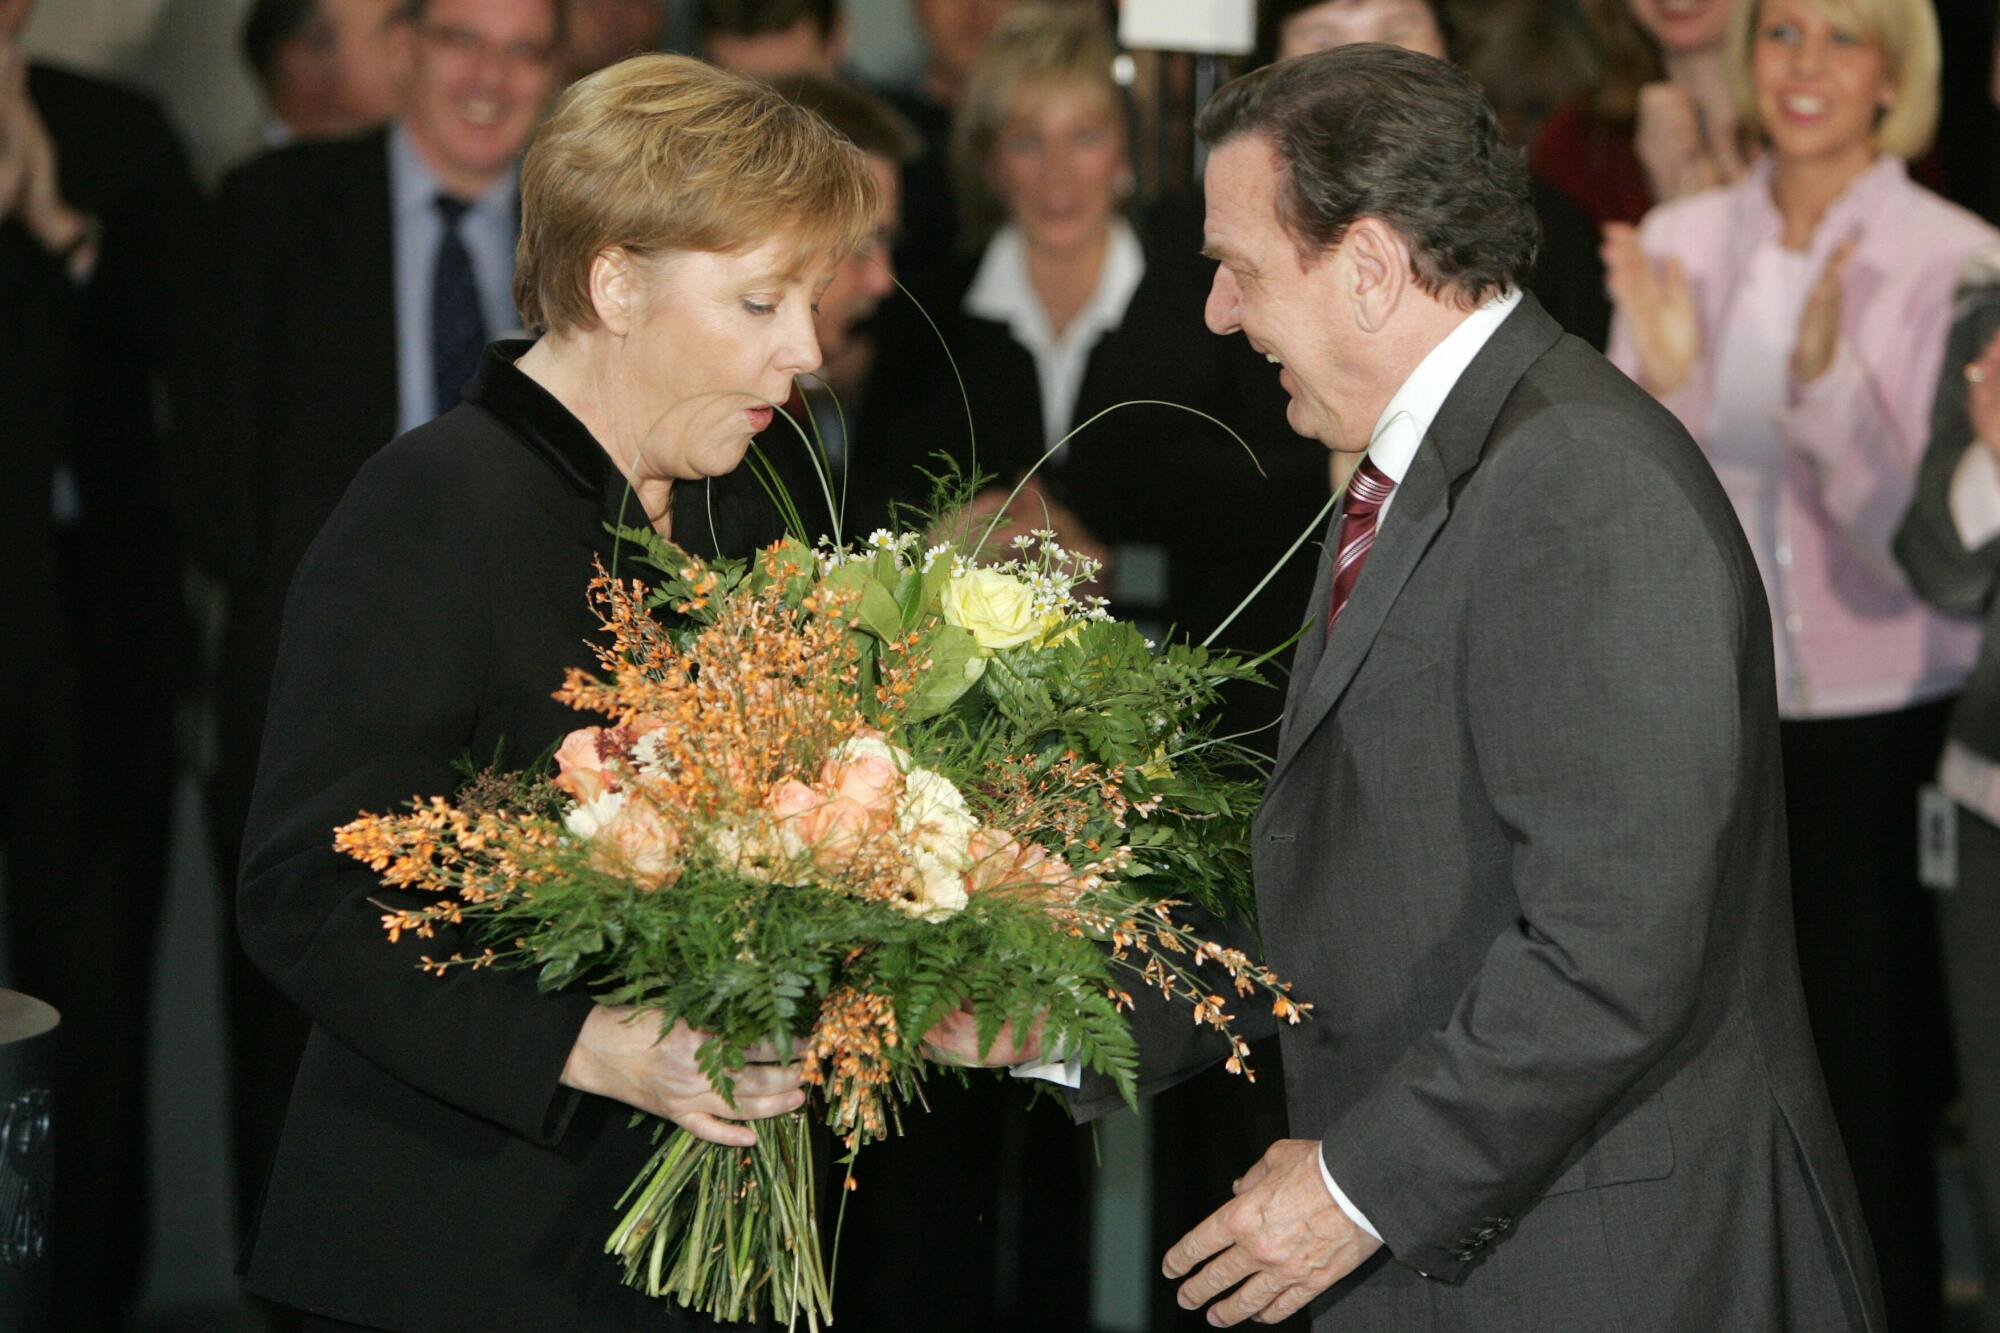 New Chancellor Angela Merkel is given a bouquet of flowers by outgoing Chancellor Gerhard Schroeder in 2005
